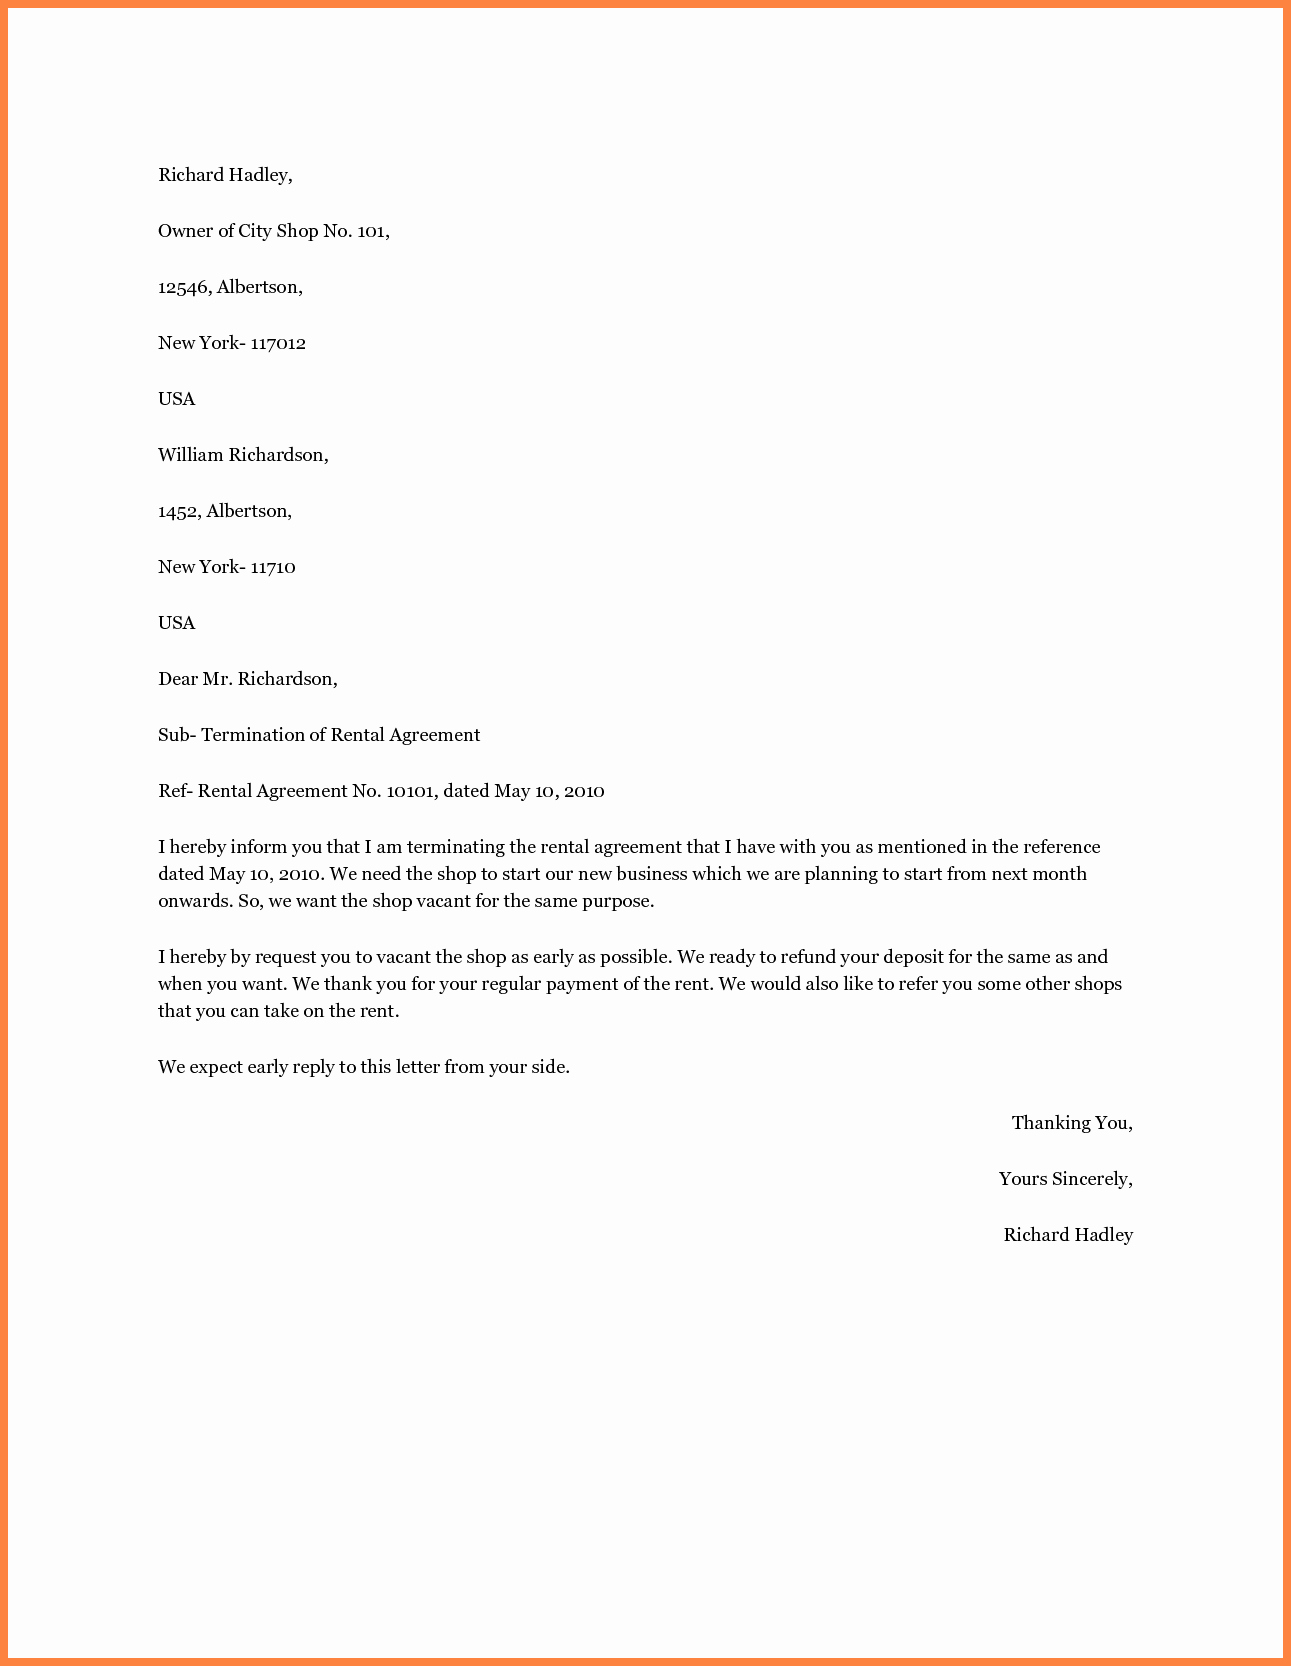 Termination Of Lease Agreement Template Awesome 8 Termination Of Rental Agreement Letter by Tenant